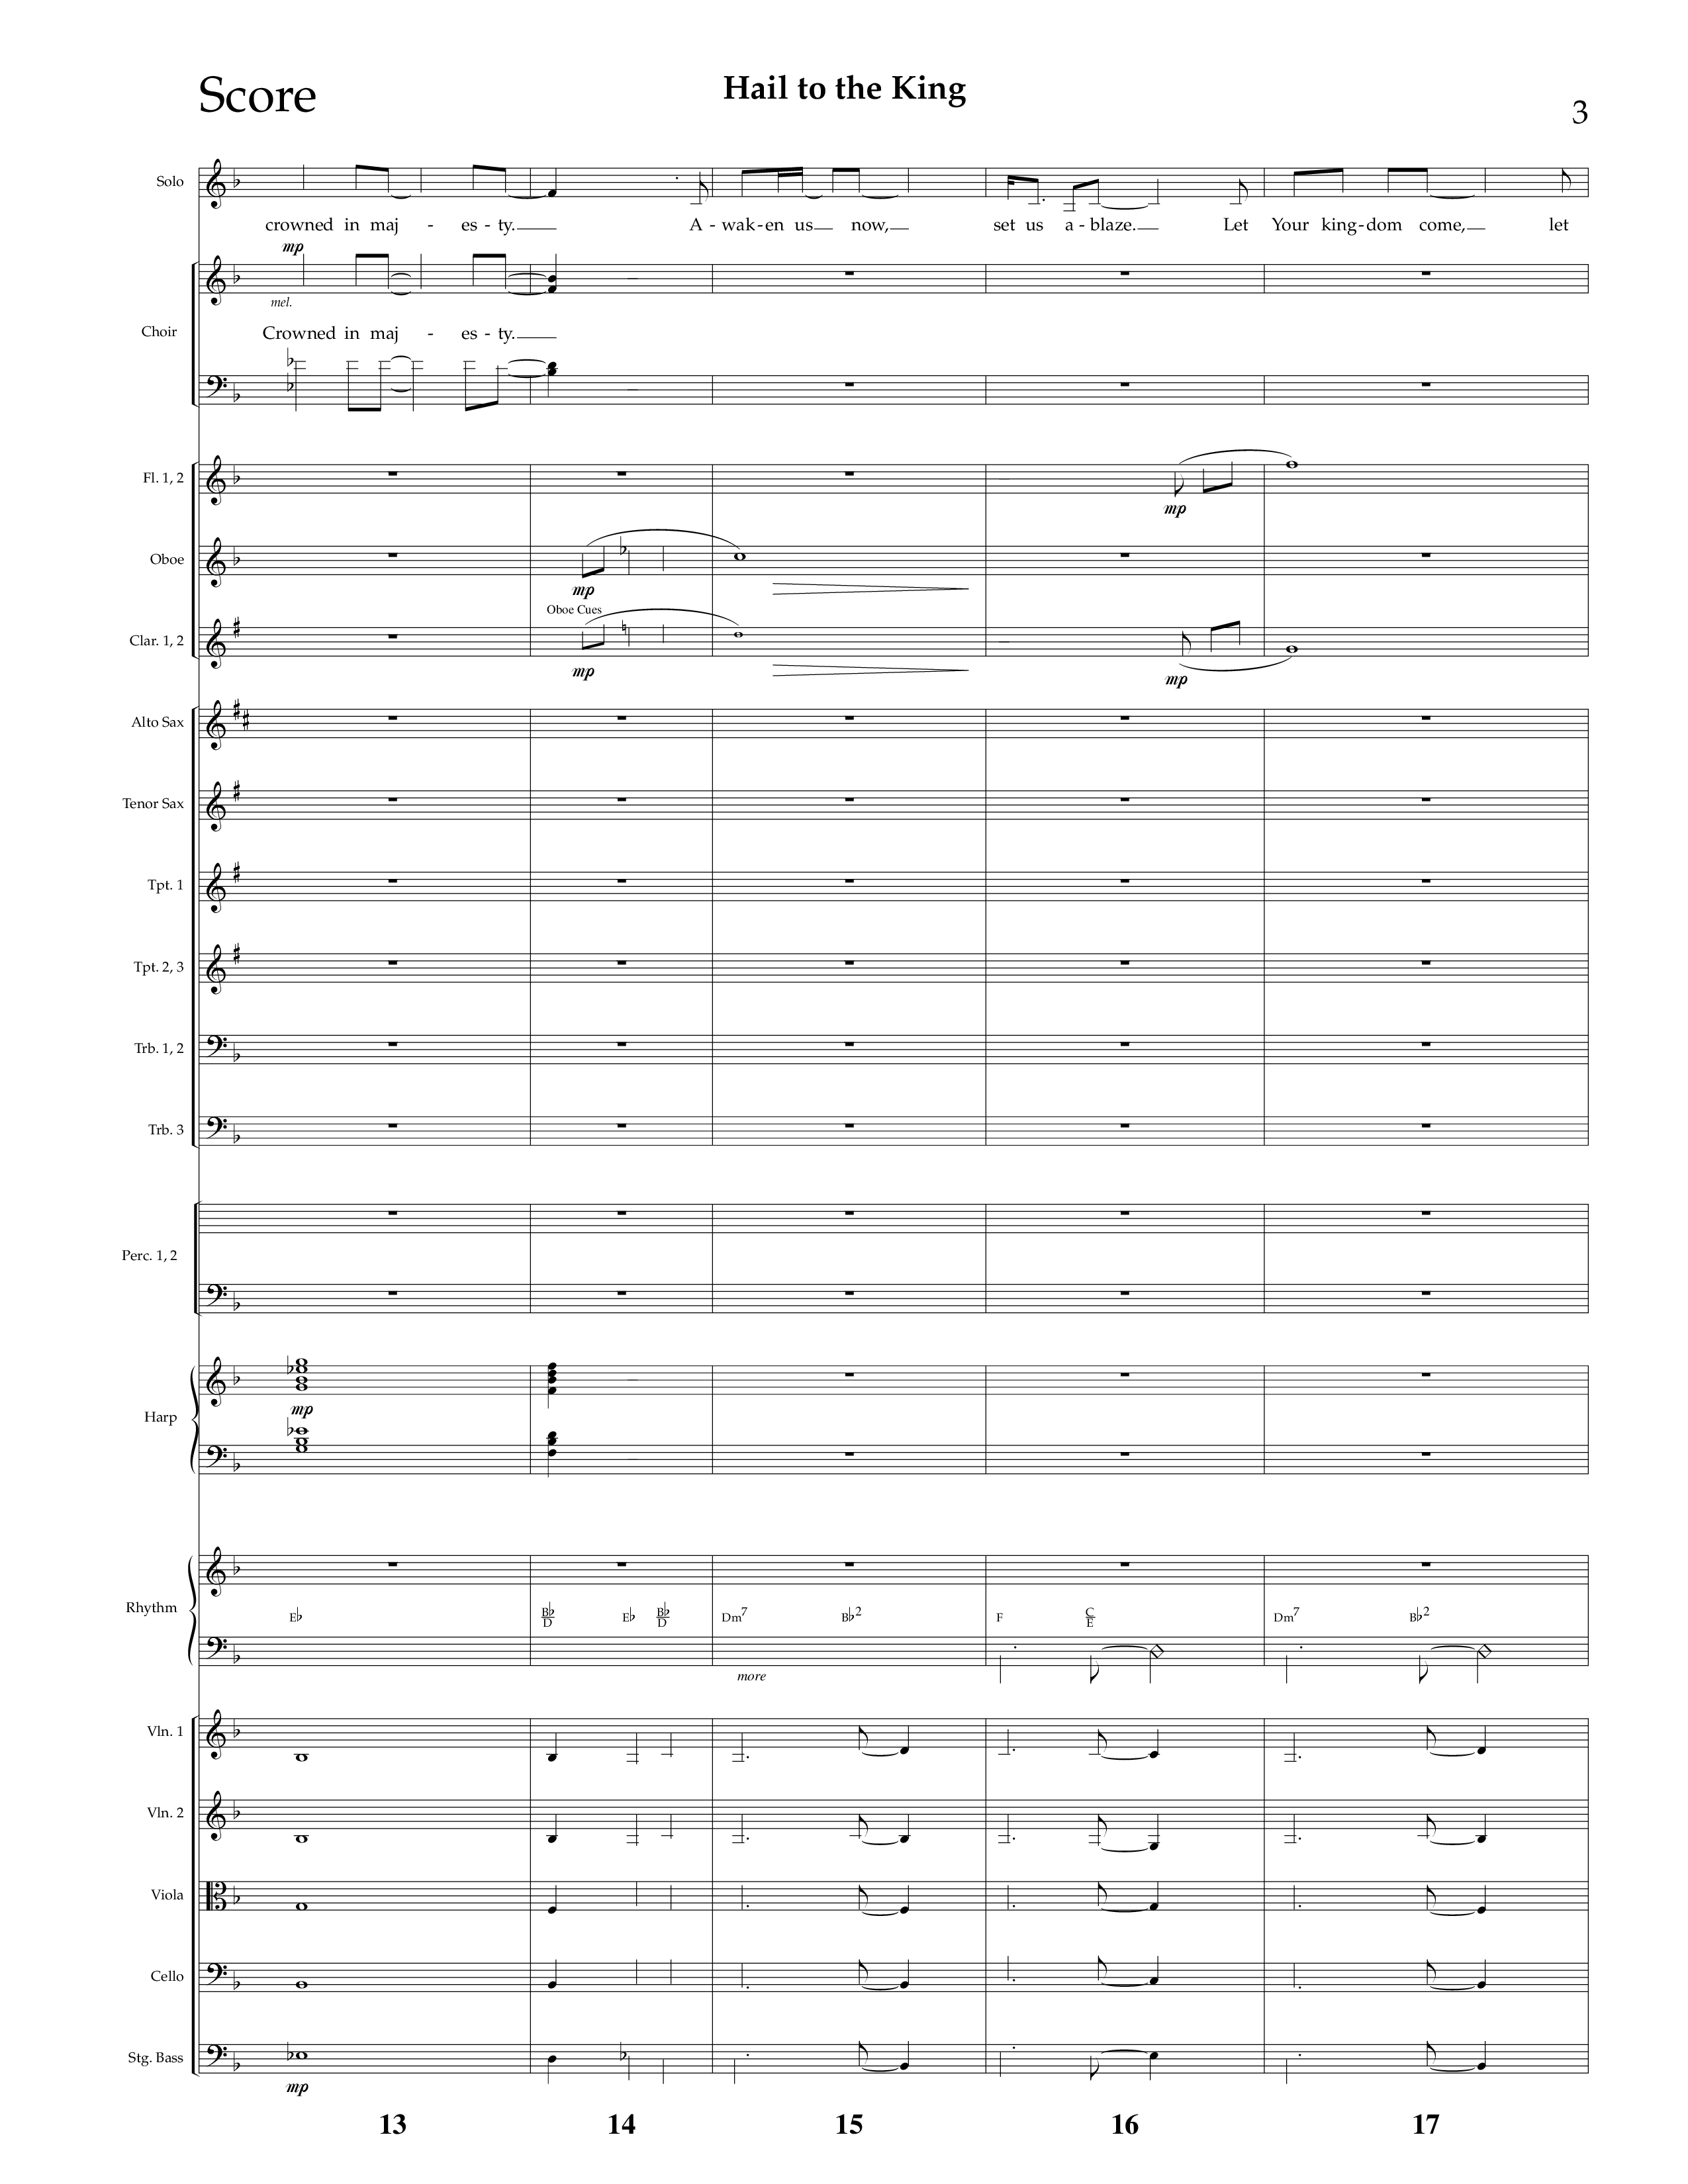 Hail To The King (Choral Anthem SATB) Conductor's Score (Lifeway Choral / Arr. J. Daniel Smith)